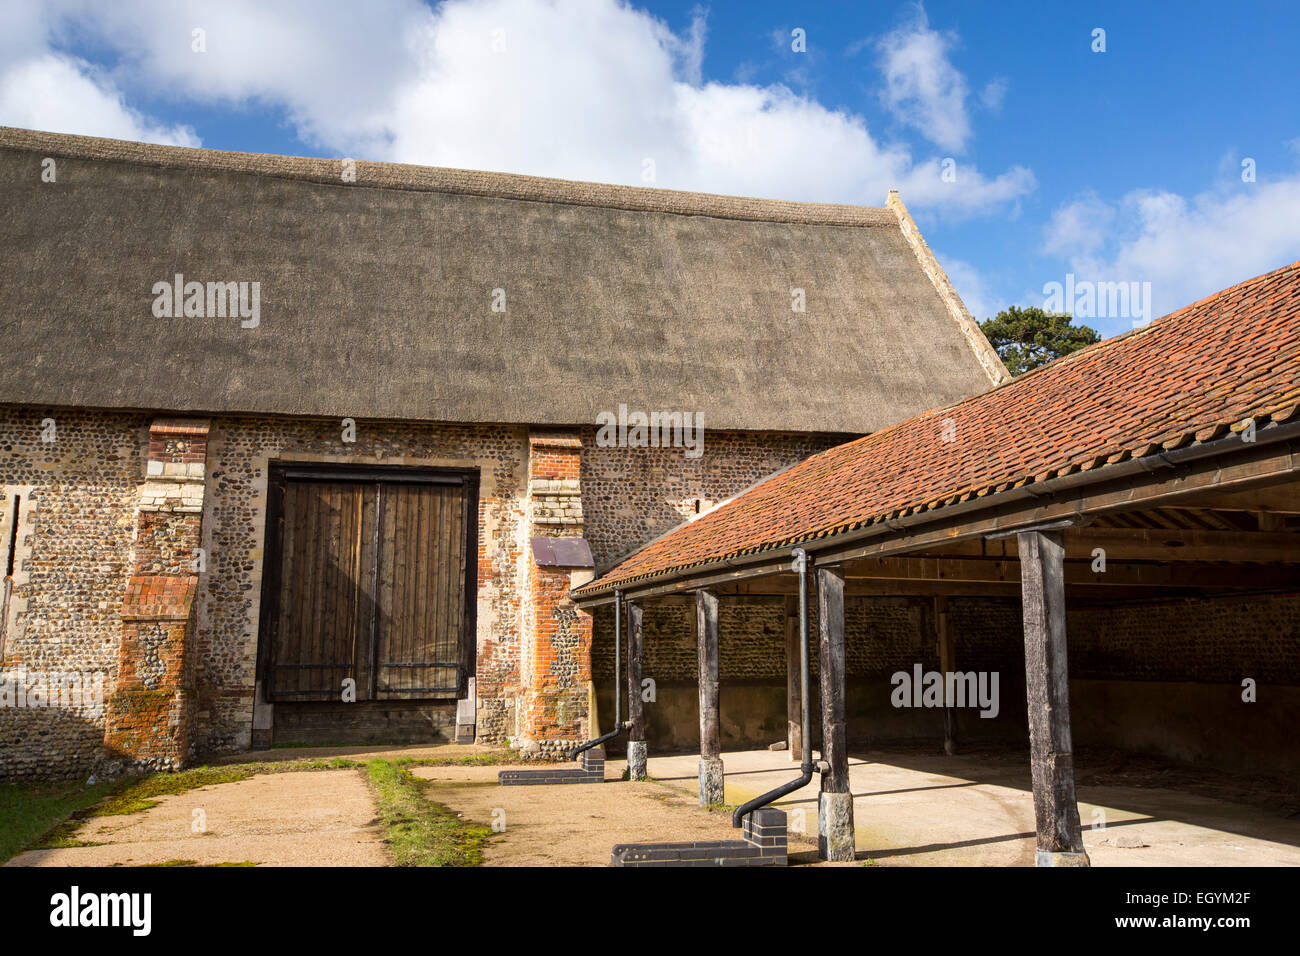 Paston great Barn, one of the largest thatched roof barns in the UK, built in 1581 and a scheduled ancient monument that is preserved for its important roosts of bats, Norfolk, UK. Stock Photo